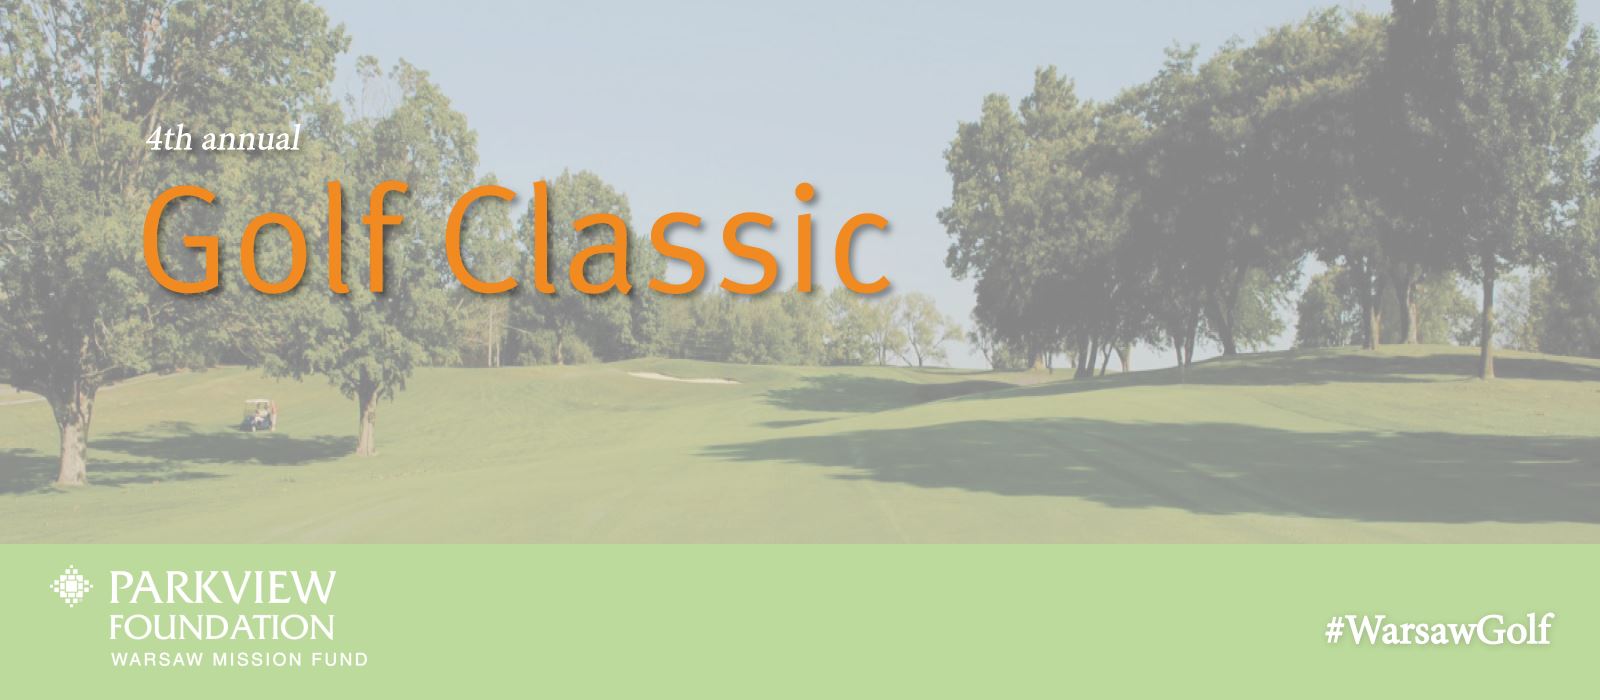 Parkview Warsaw Mission Fund Golf Classic